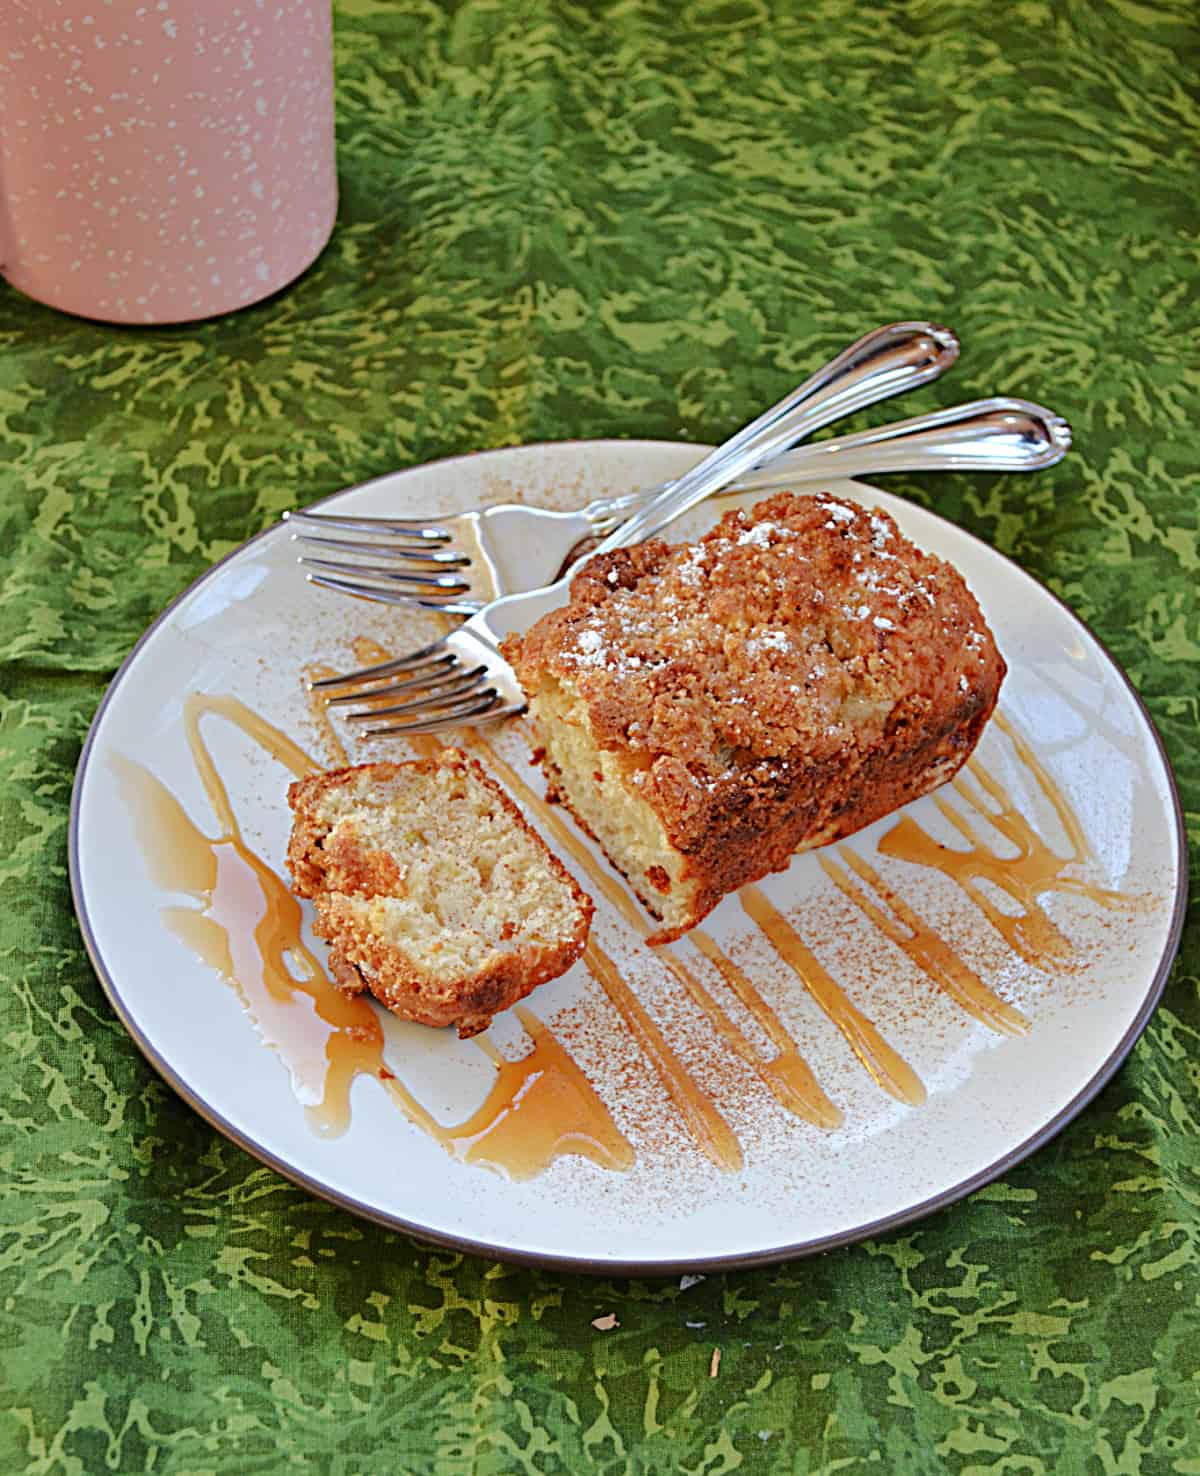 A plate drizzled in caramel sauce topped with a pear ginger mini cake with two forks on the plate and a coffee cup in the background.